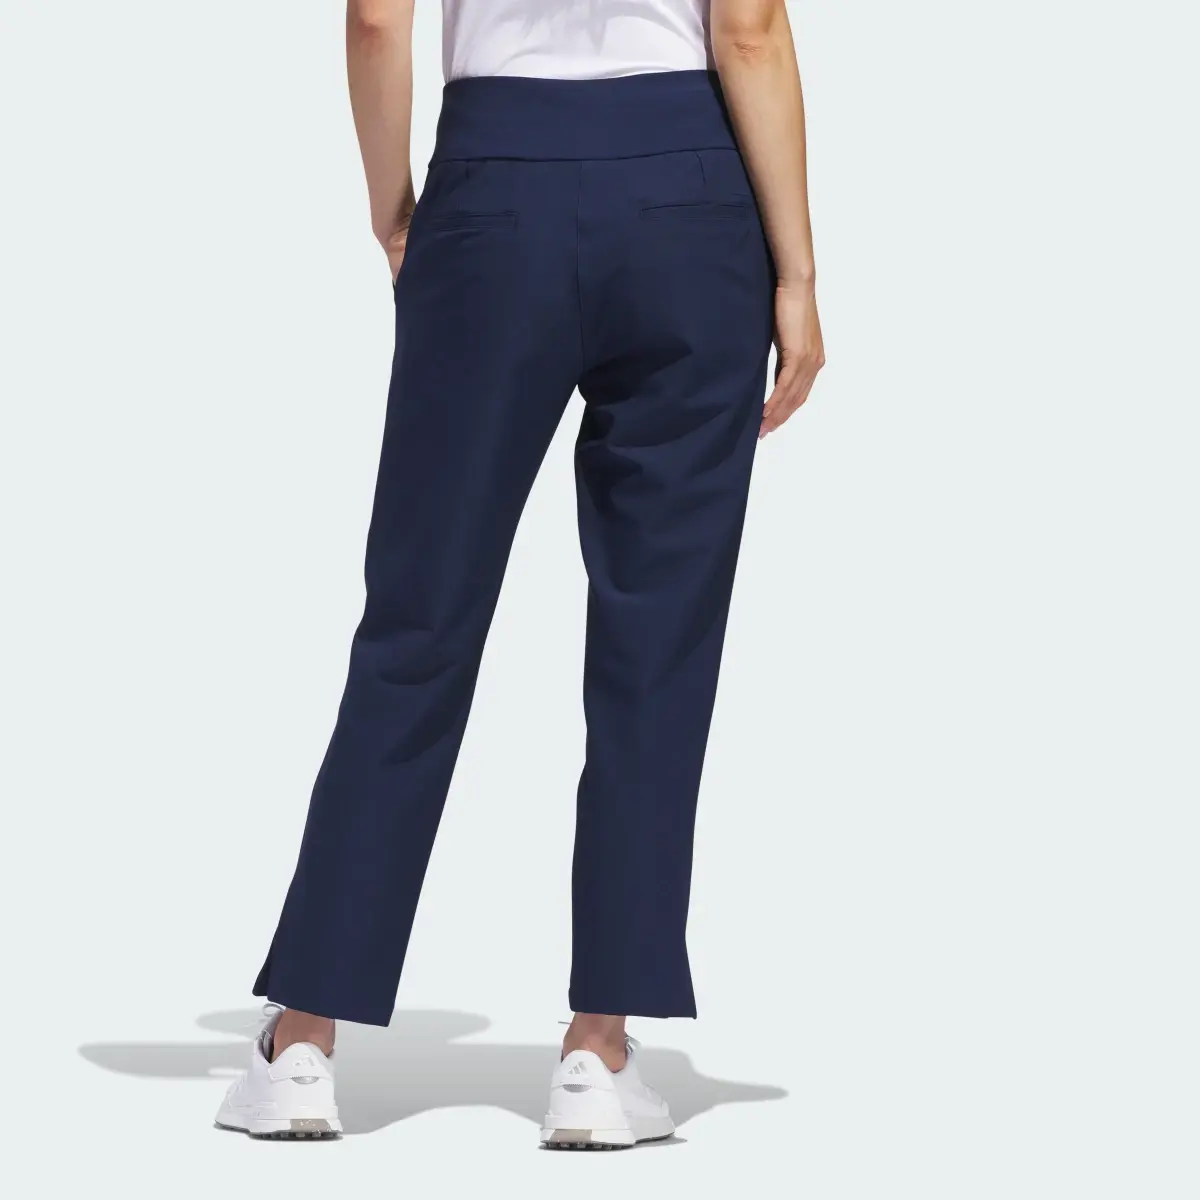 Adidas Ultimate365 Solid Ankle Pants. 2